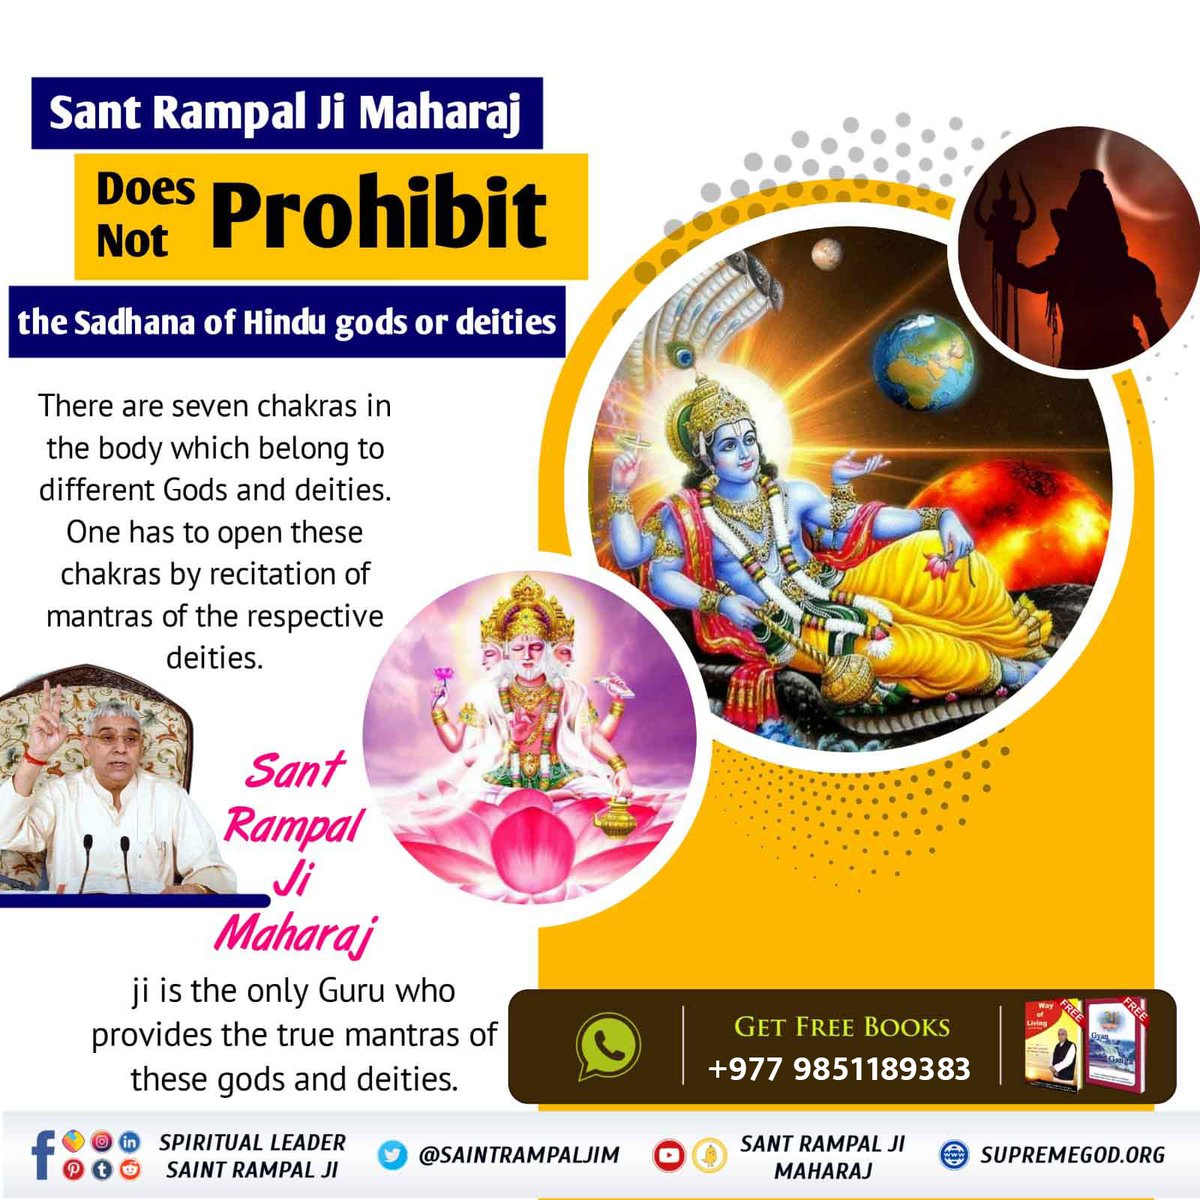 Sant Rampal Ji Maharaj
Does Not Prohibit
the Sadhna of Hindu Gods or deities
There are seven chakras in the body which belongs to different Gods and deities.
One has to open these chakras by recitation of mantras of the respective deities.
#wednesdaythought